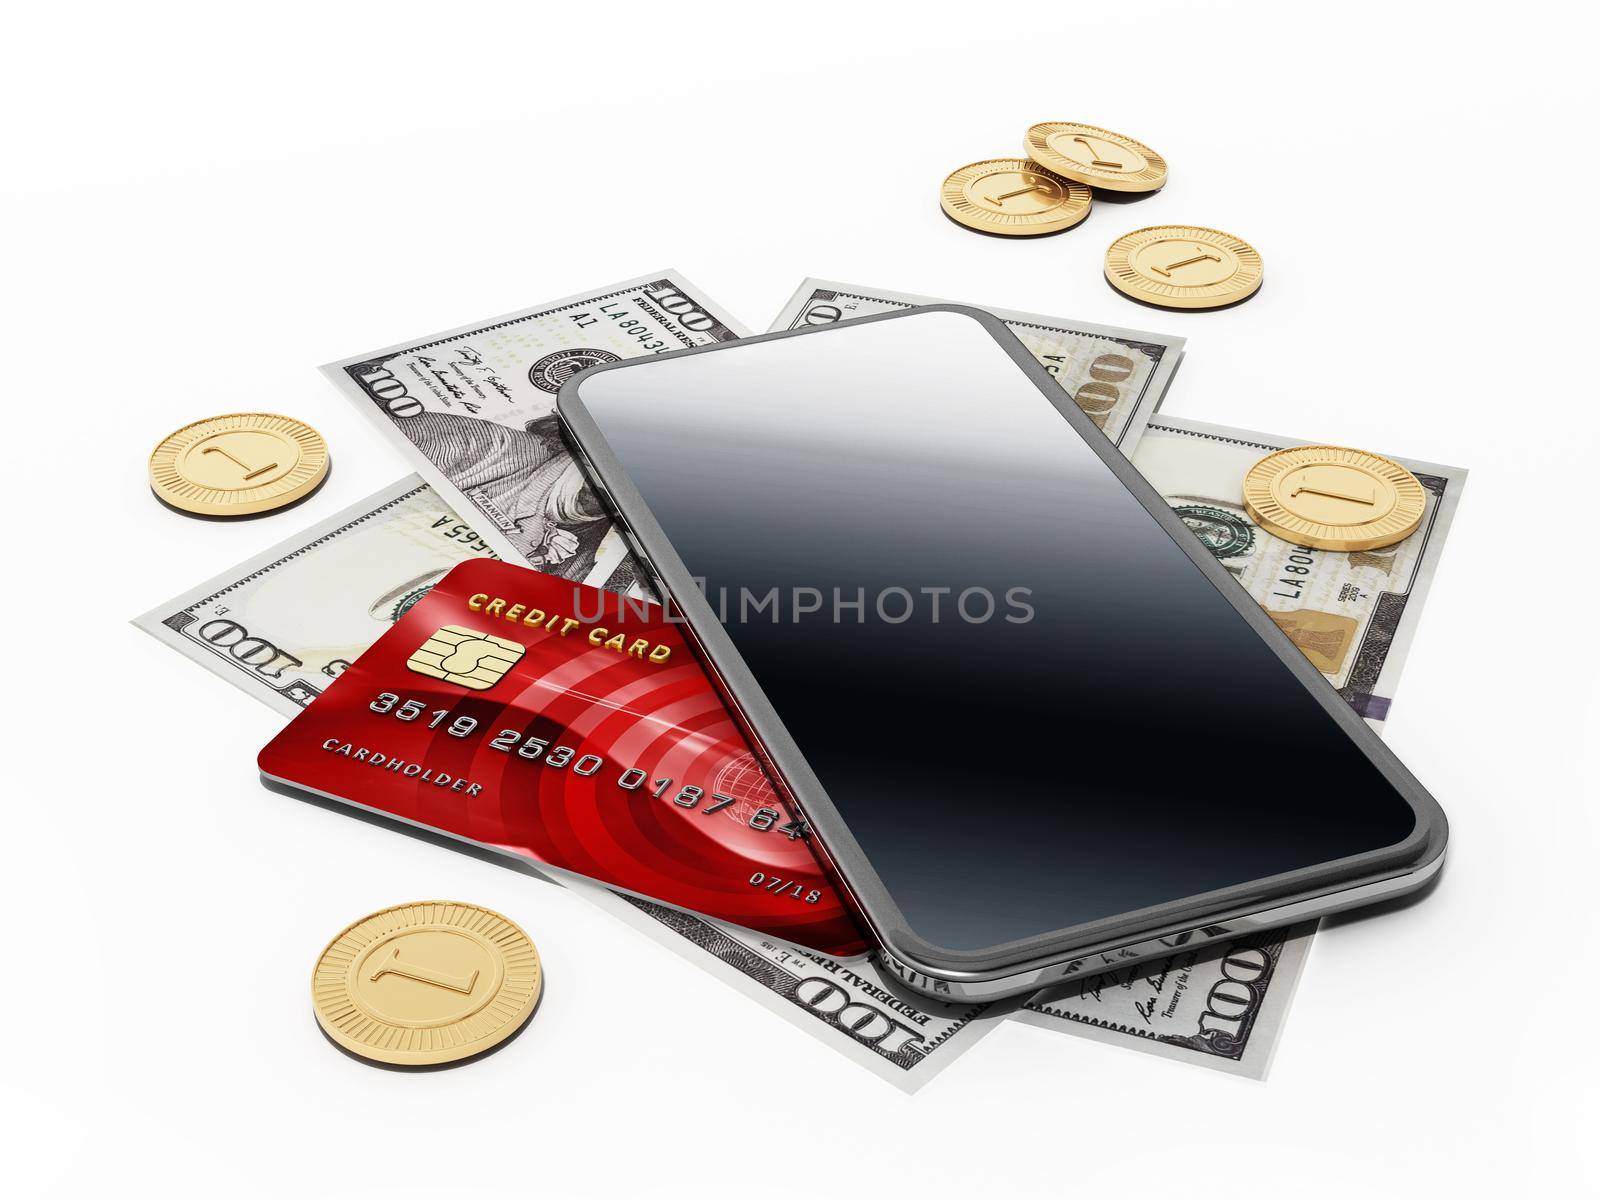 Smartphone, credit card and dollar bills isolated on white background. 3D illustration.